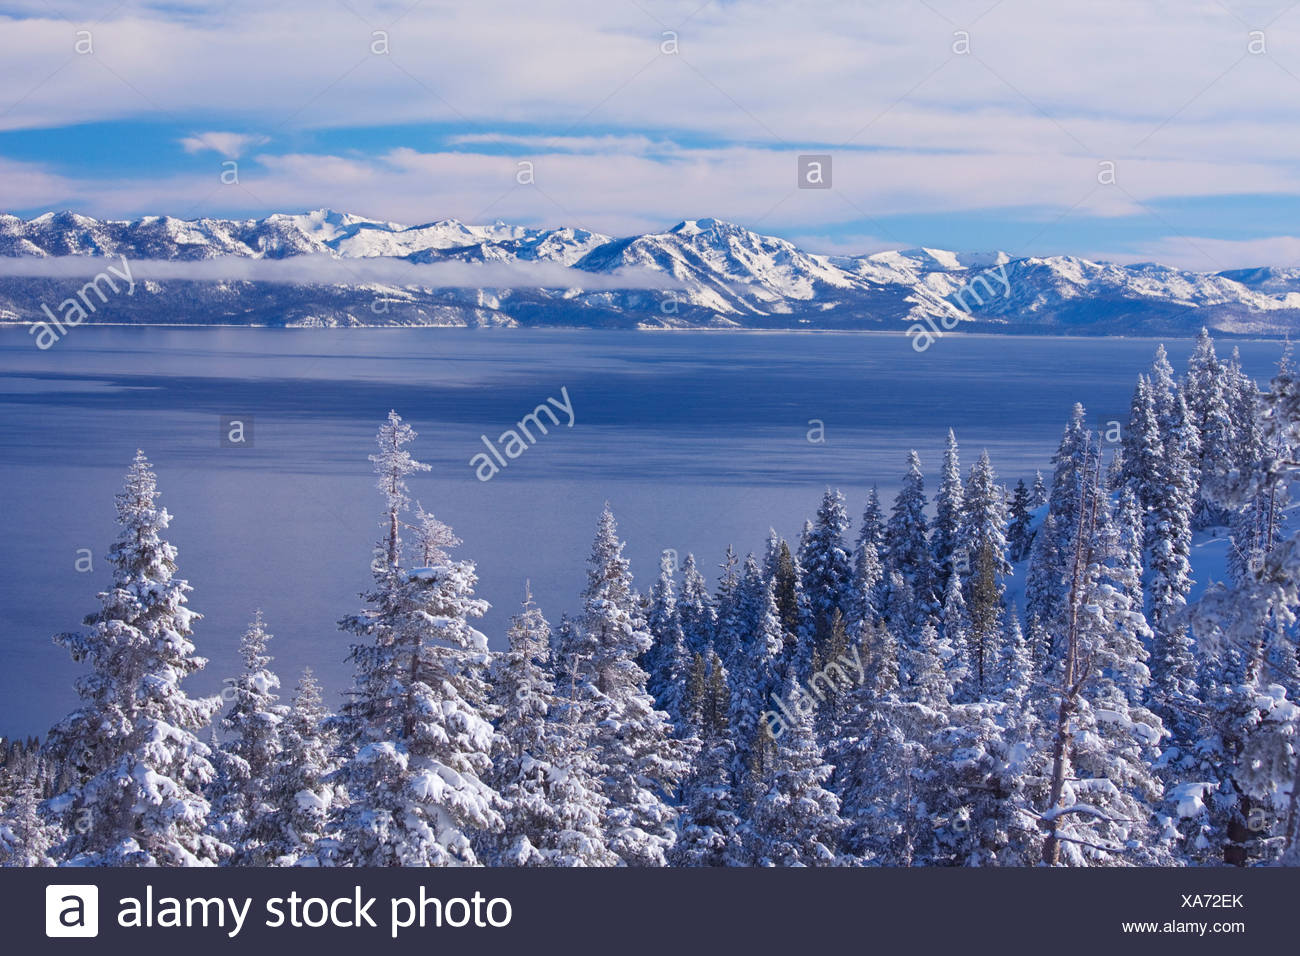 A View Of Lake Tahoe California With Snowy Trees In The Morning After A Winter Storm Stock Photo Alamy